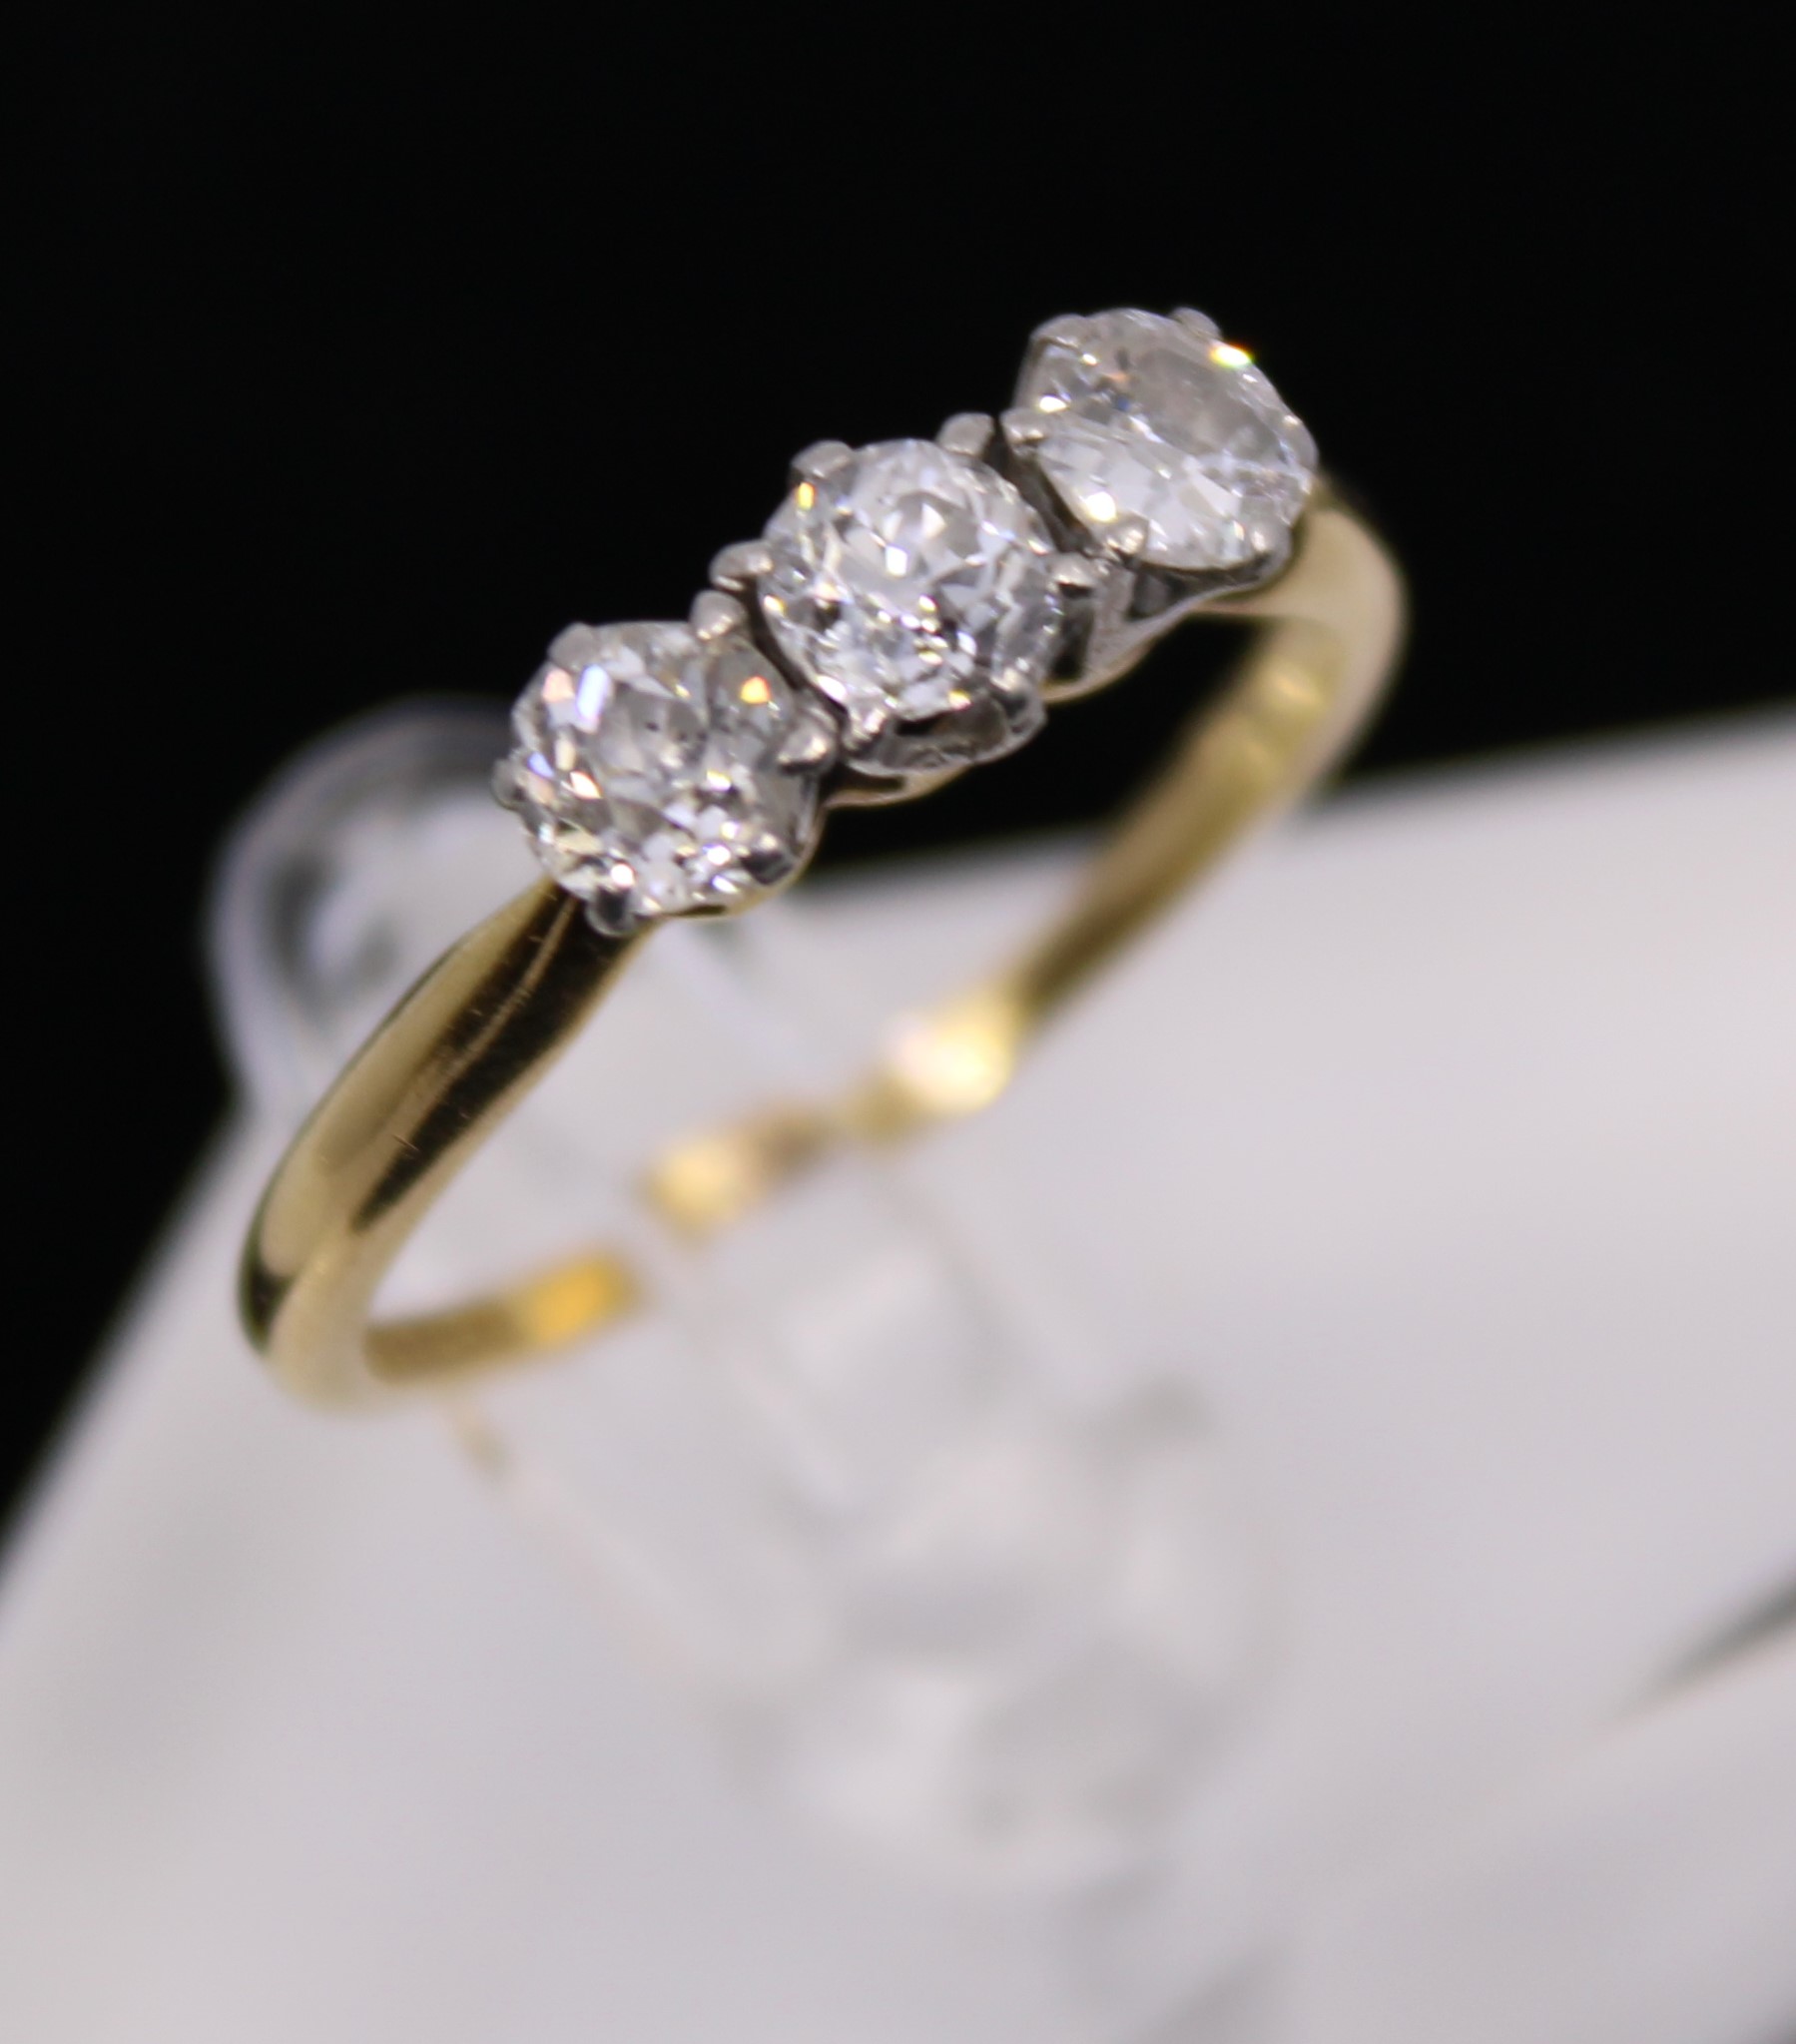 18ct Yellow Gold Three stone Old European cut Diamond ring.  The centre diamond is approx 0.25ct and - Image 2 of 3